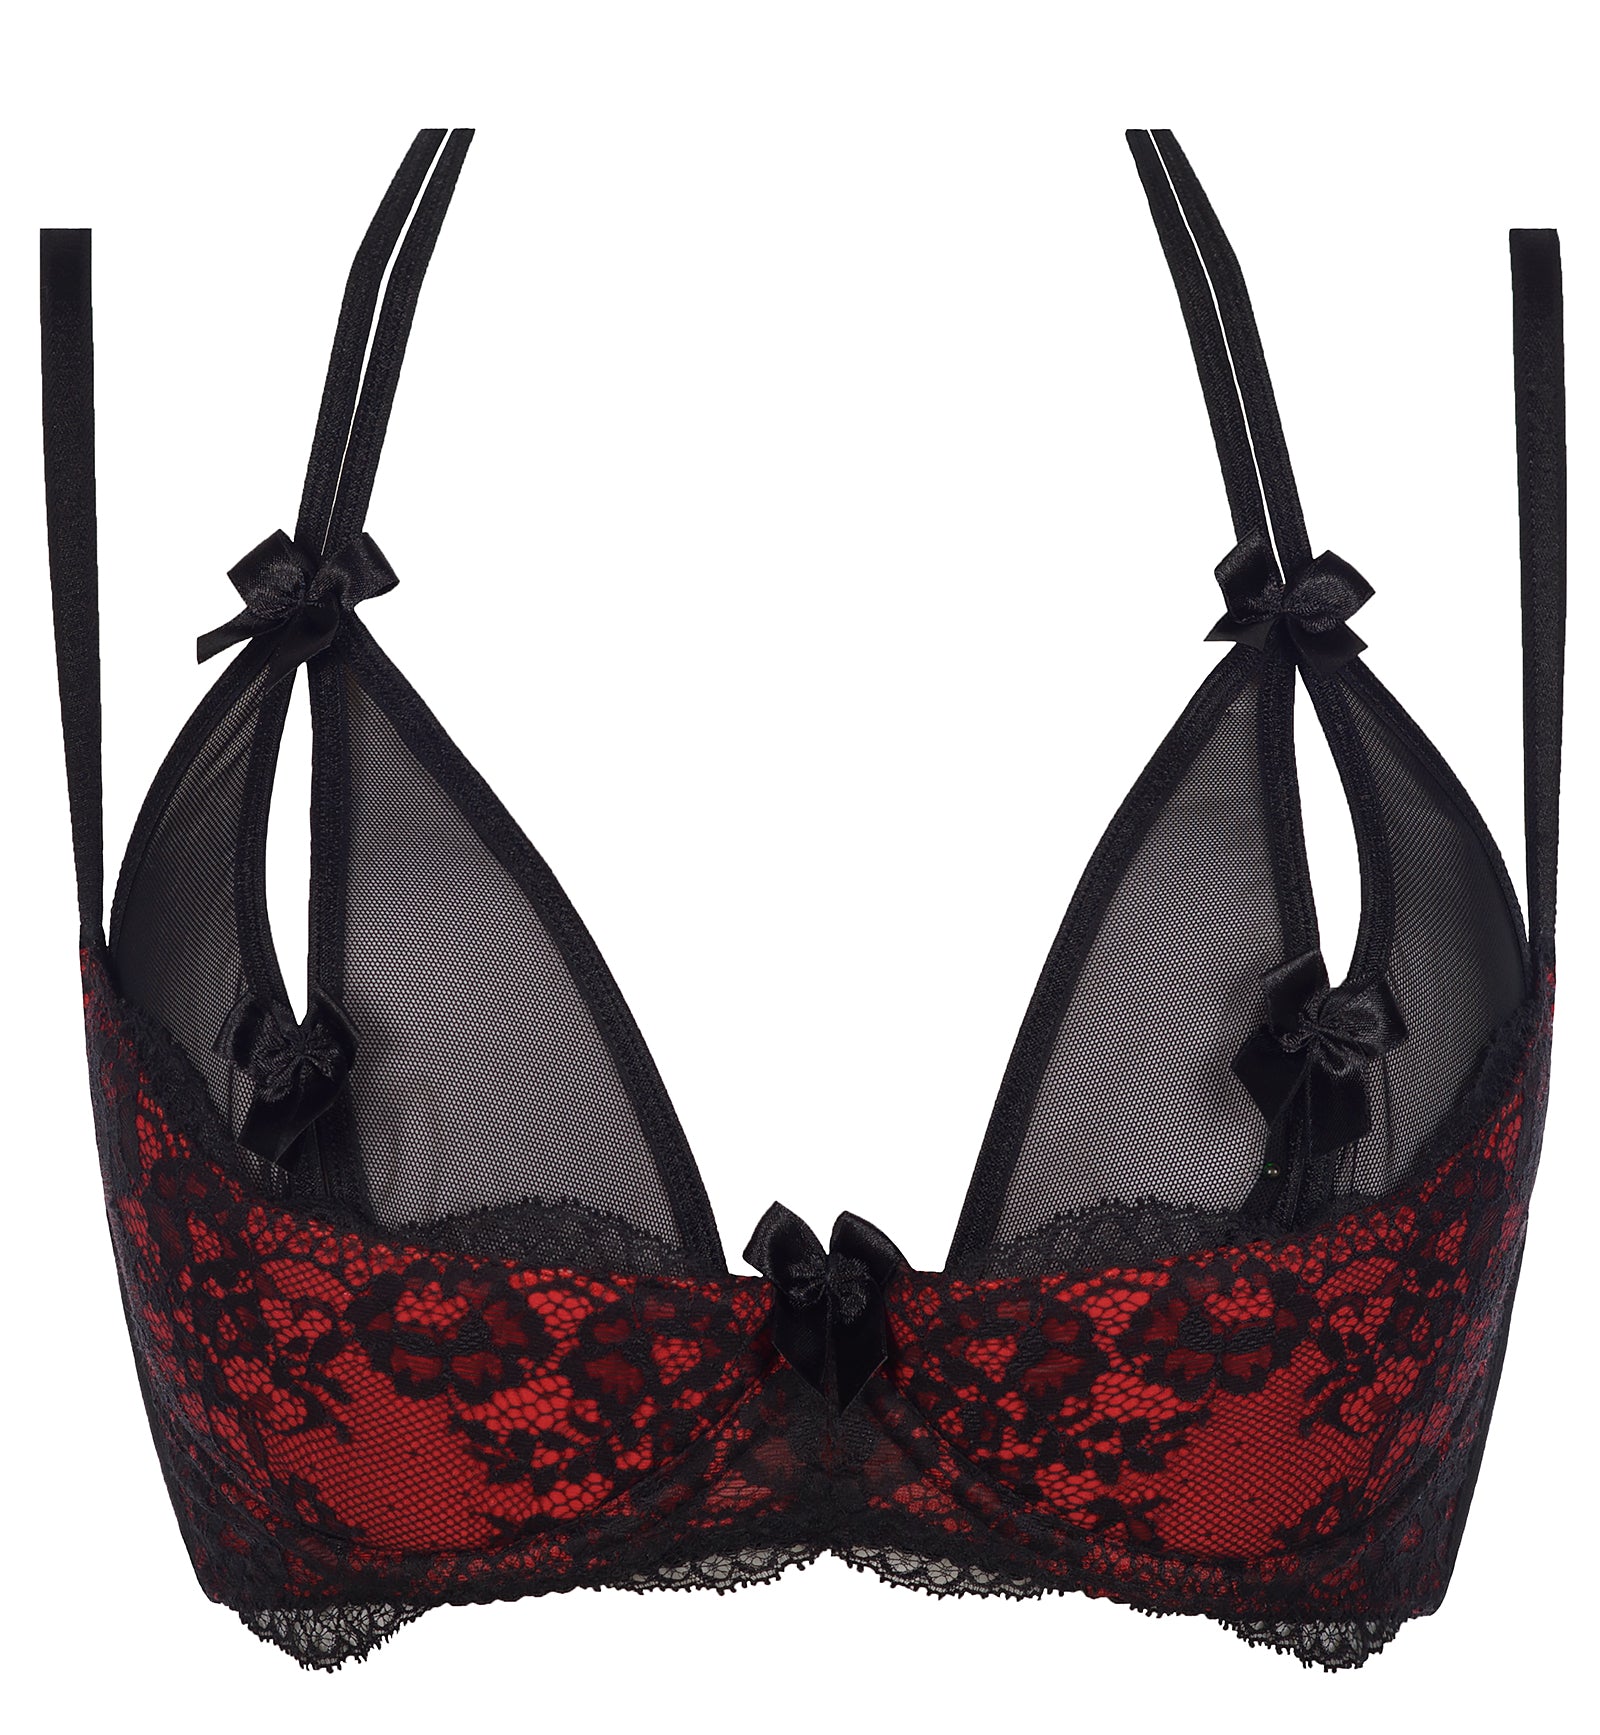 Red And Black Lace Peek A Boo Bra And Panty Set Shop Sexy Lingerie Online Lingerie Seduction